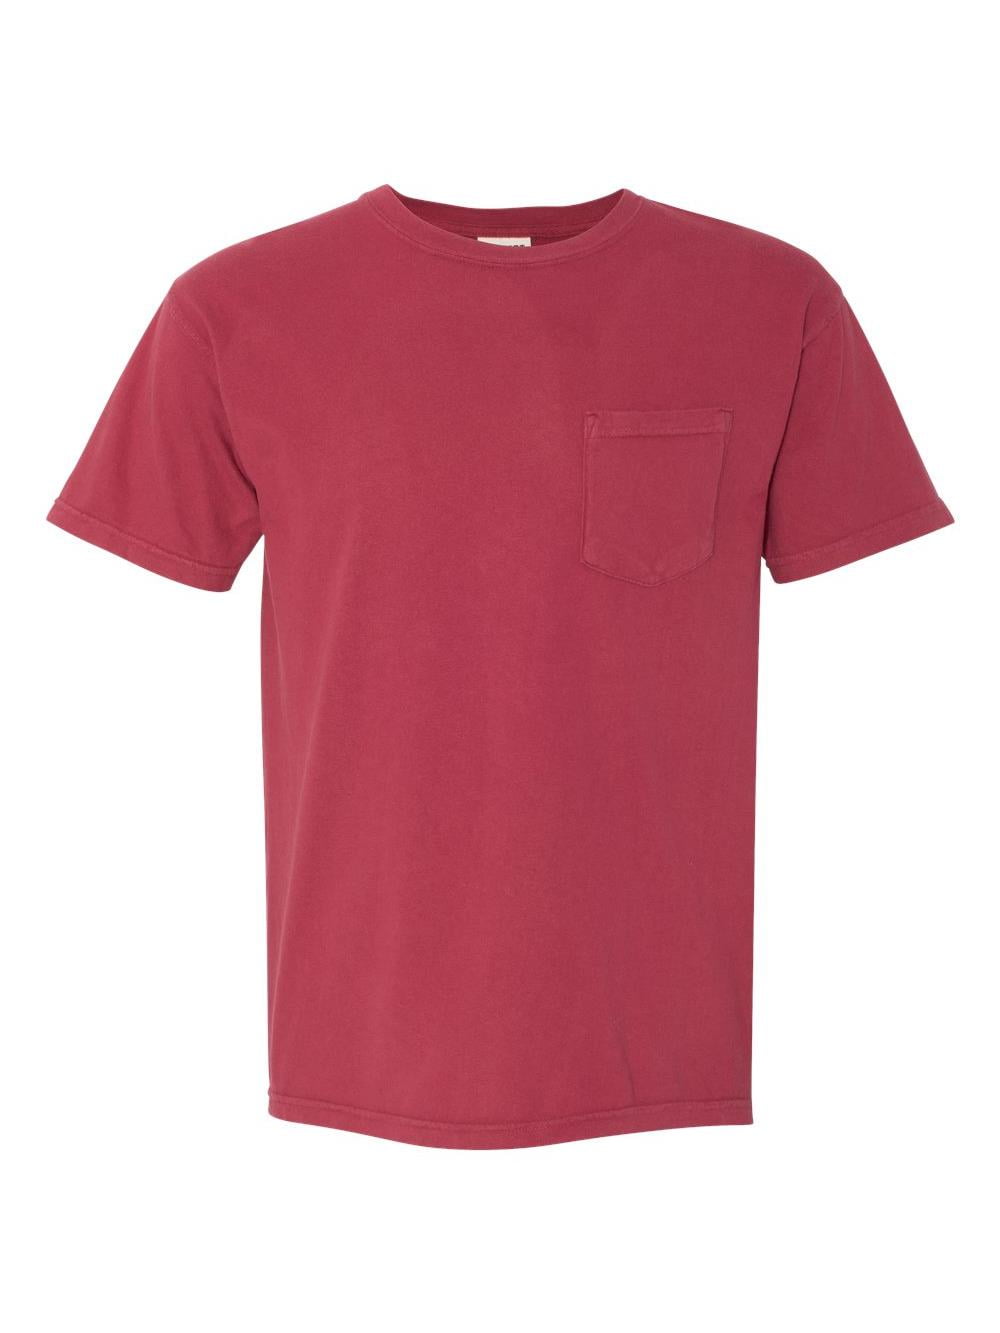 COMFORT COLORS - Comfort Colors T-Shirts Garment Dyed Heavyweight ...